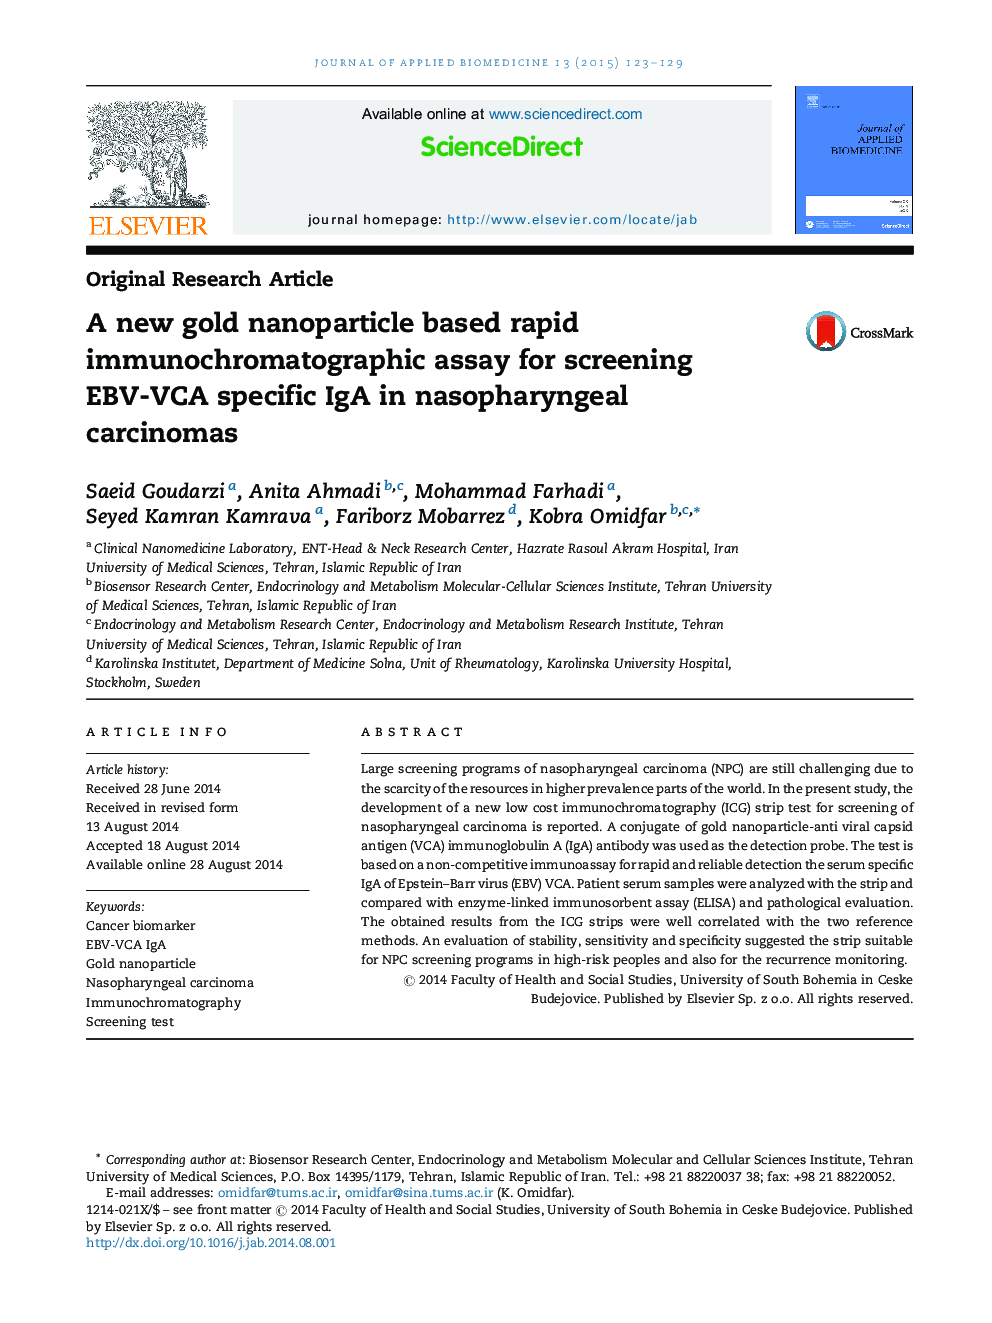 A new gold nanoparticle based rapid immunochromatographic assay for screening EBV-VCA specific IgA in nasopharyngeal carcinomas